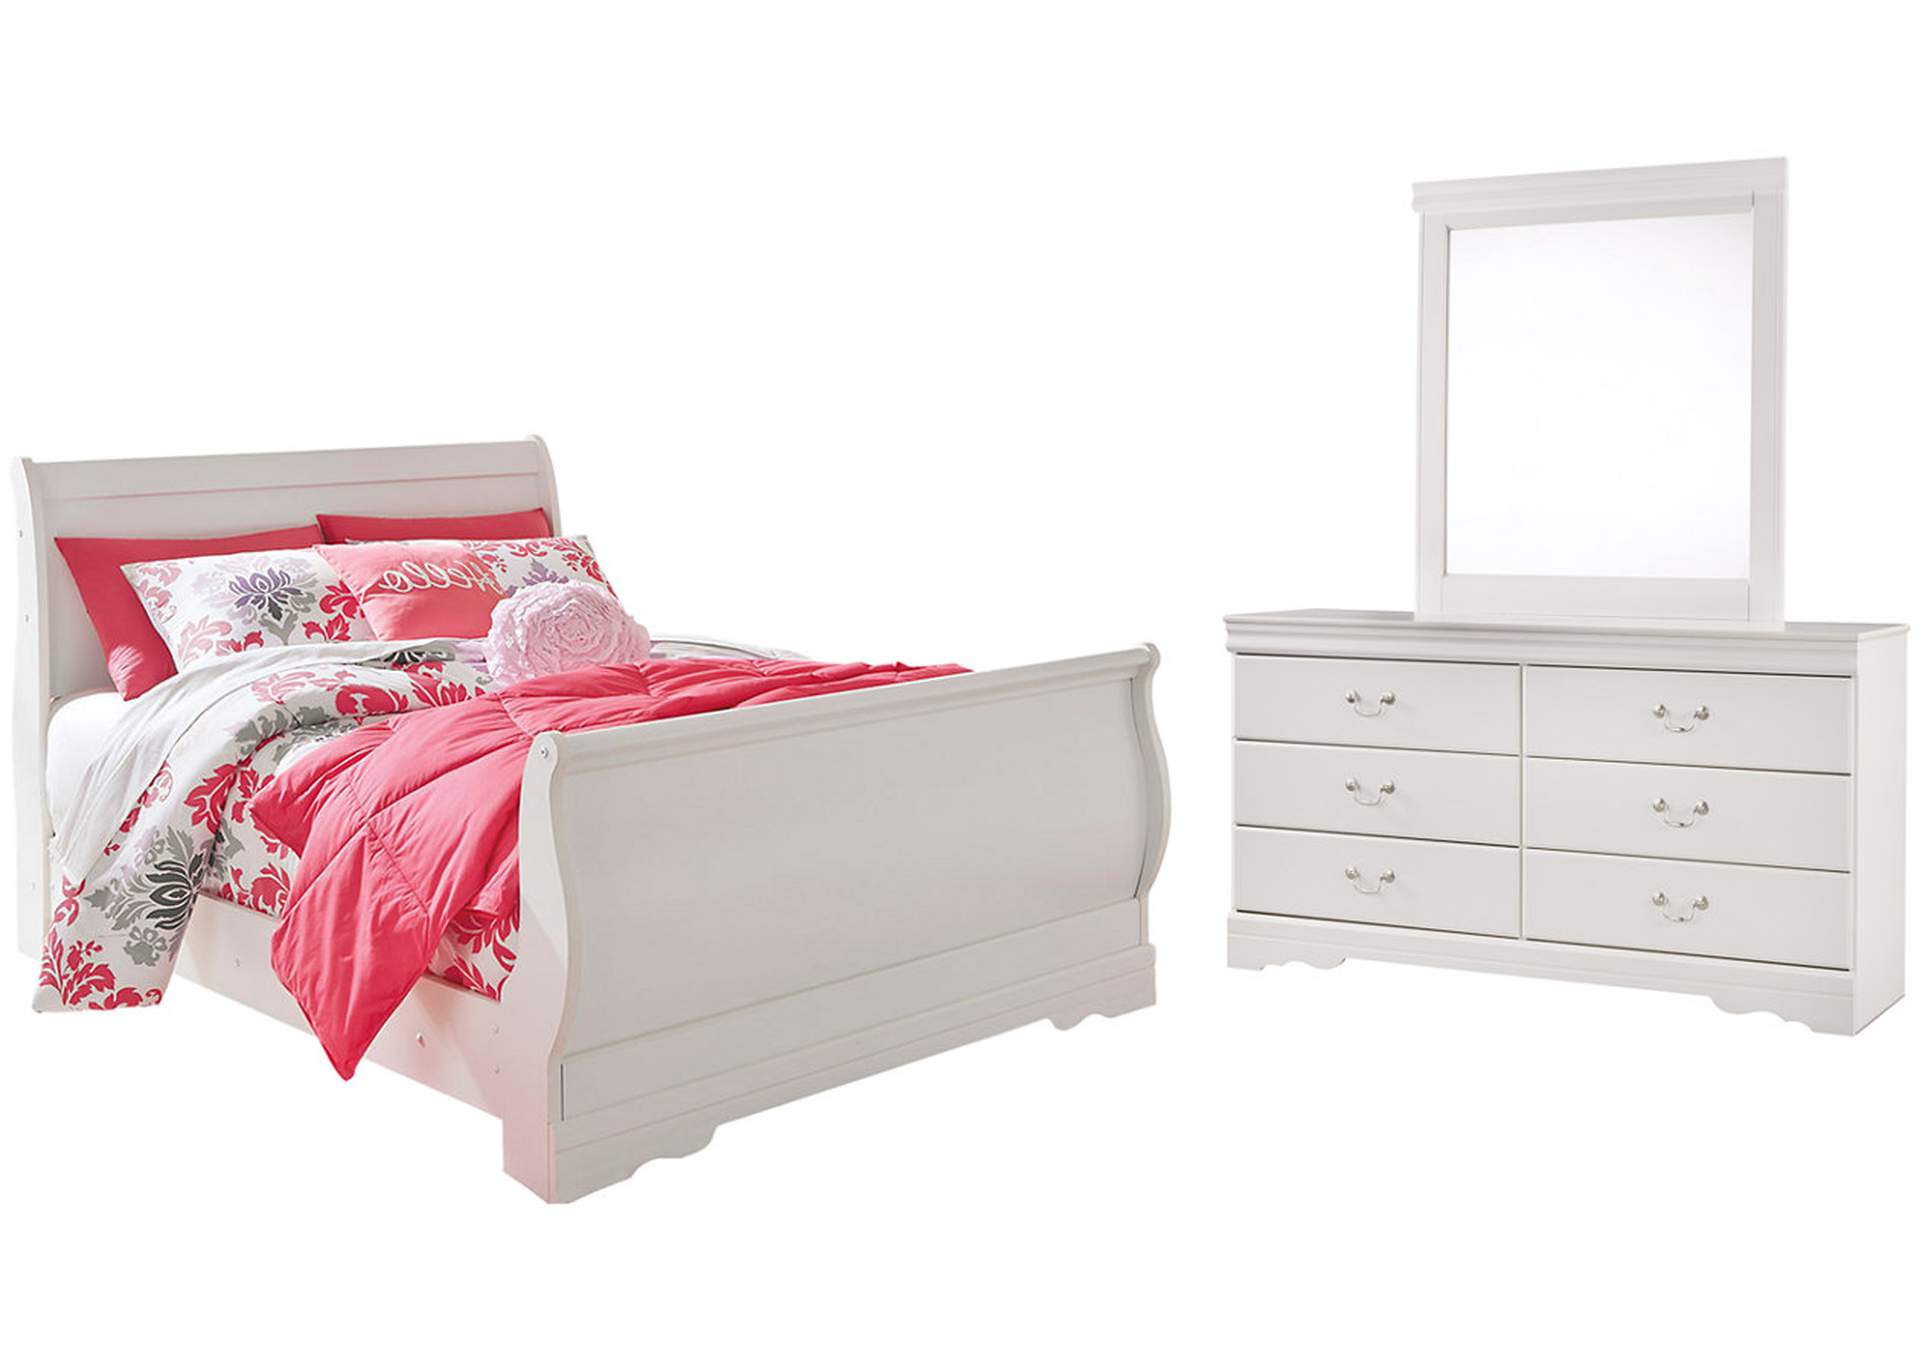 Anarasia Full Sleigh Bed with Dresser and Mirror,Signature Design By Ashley